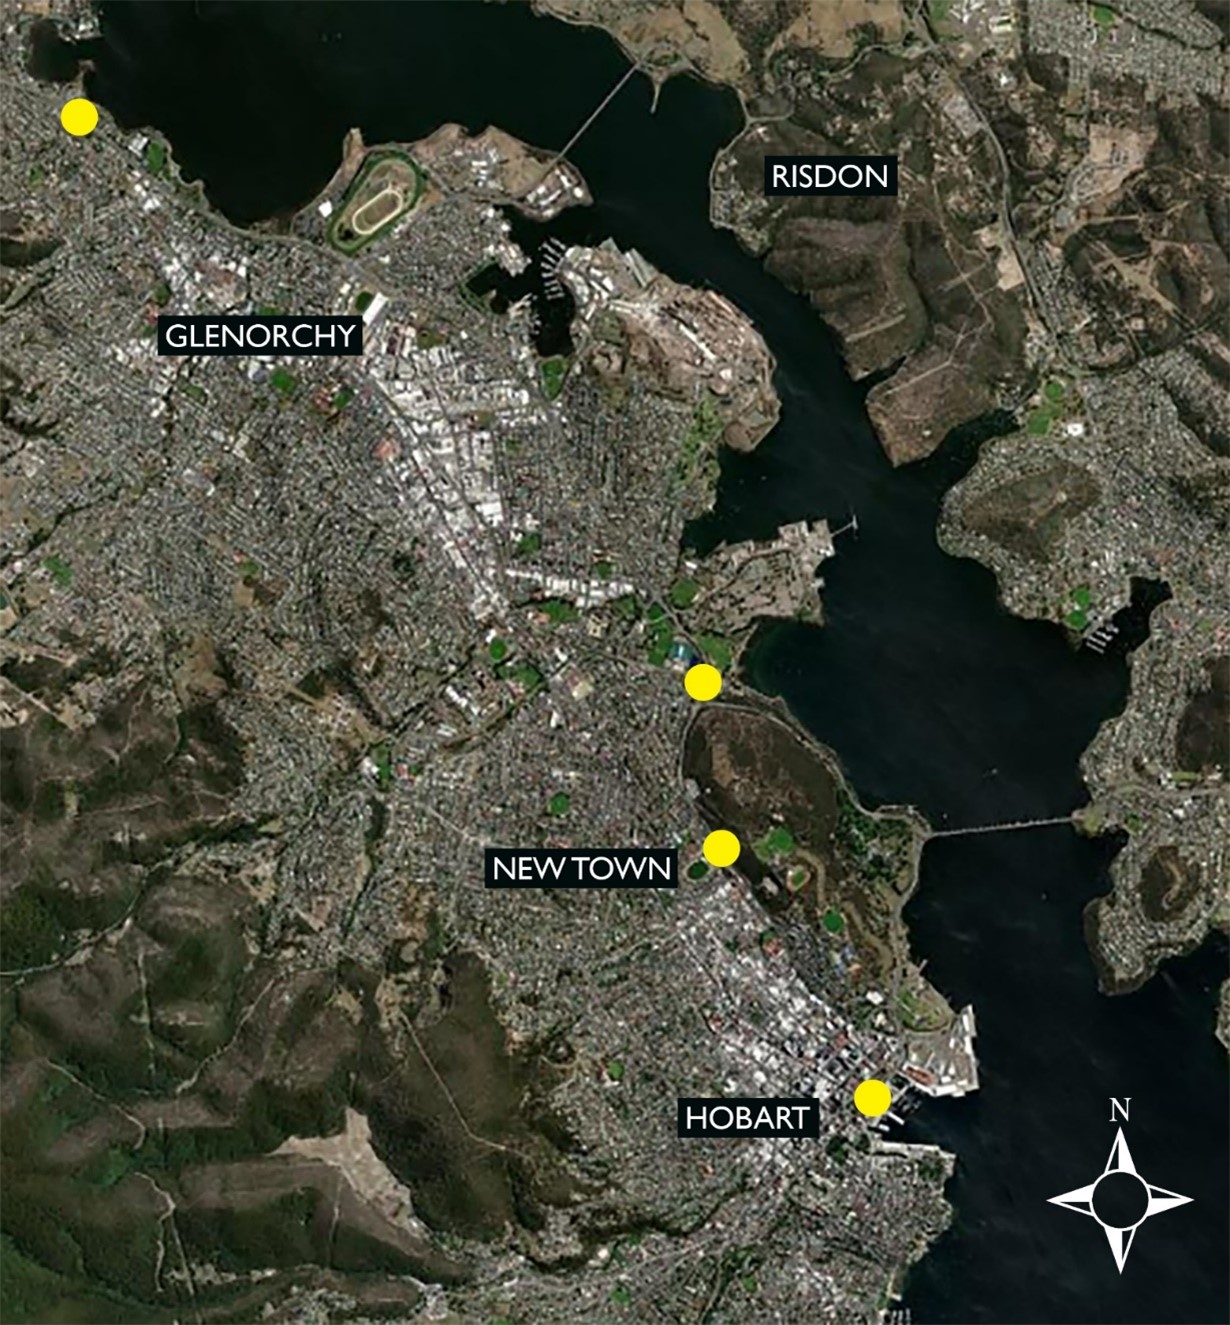 Hobart and the northern suburbs VMS locations